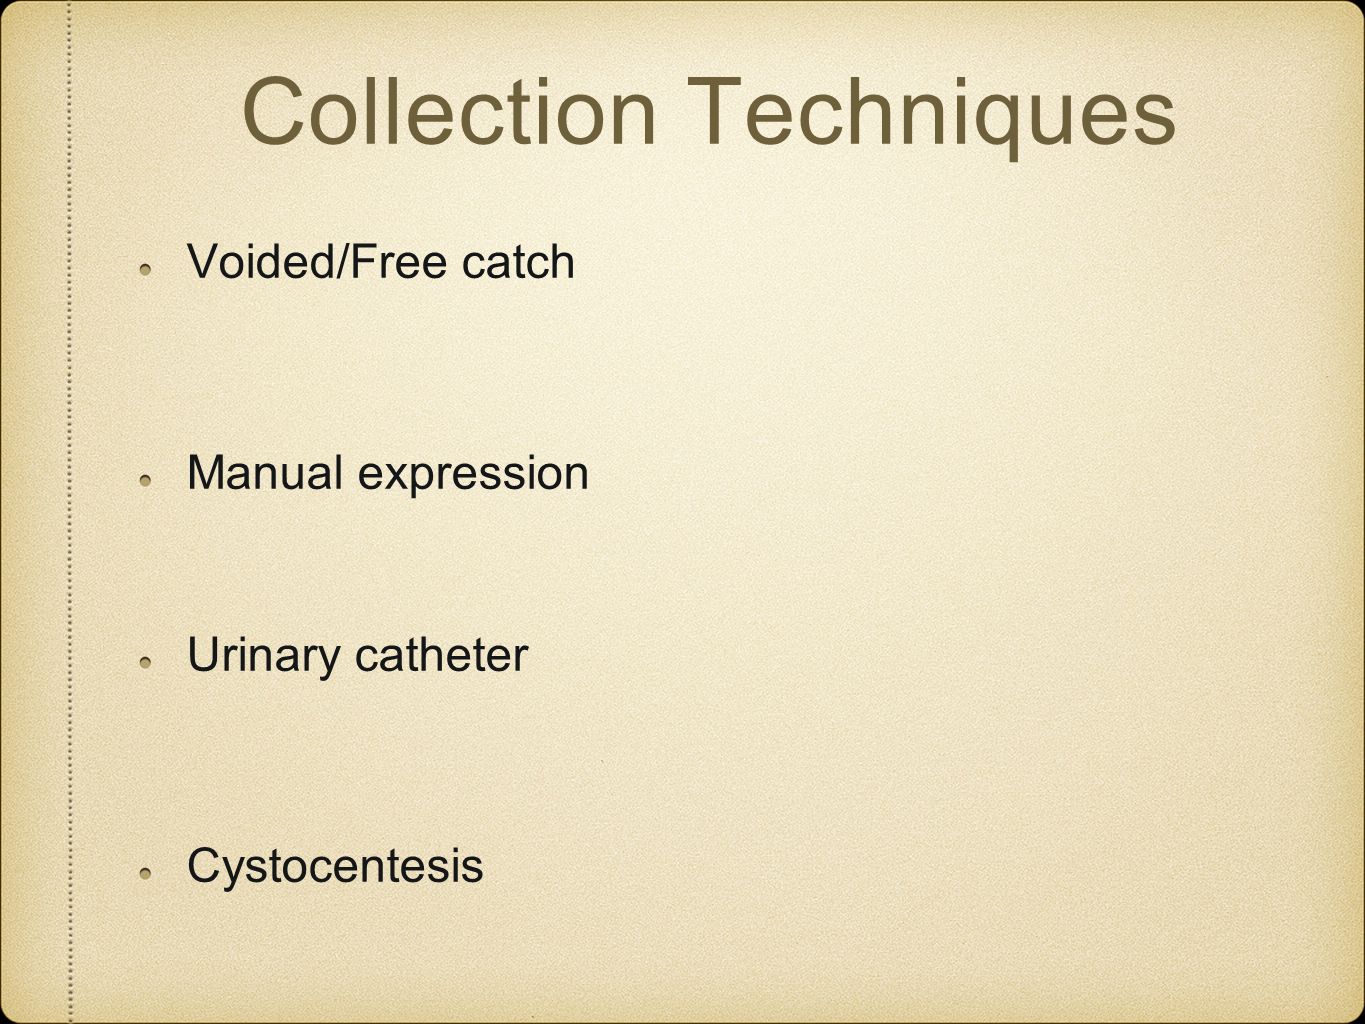 Urine Collection Techniques - ppt video online download